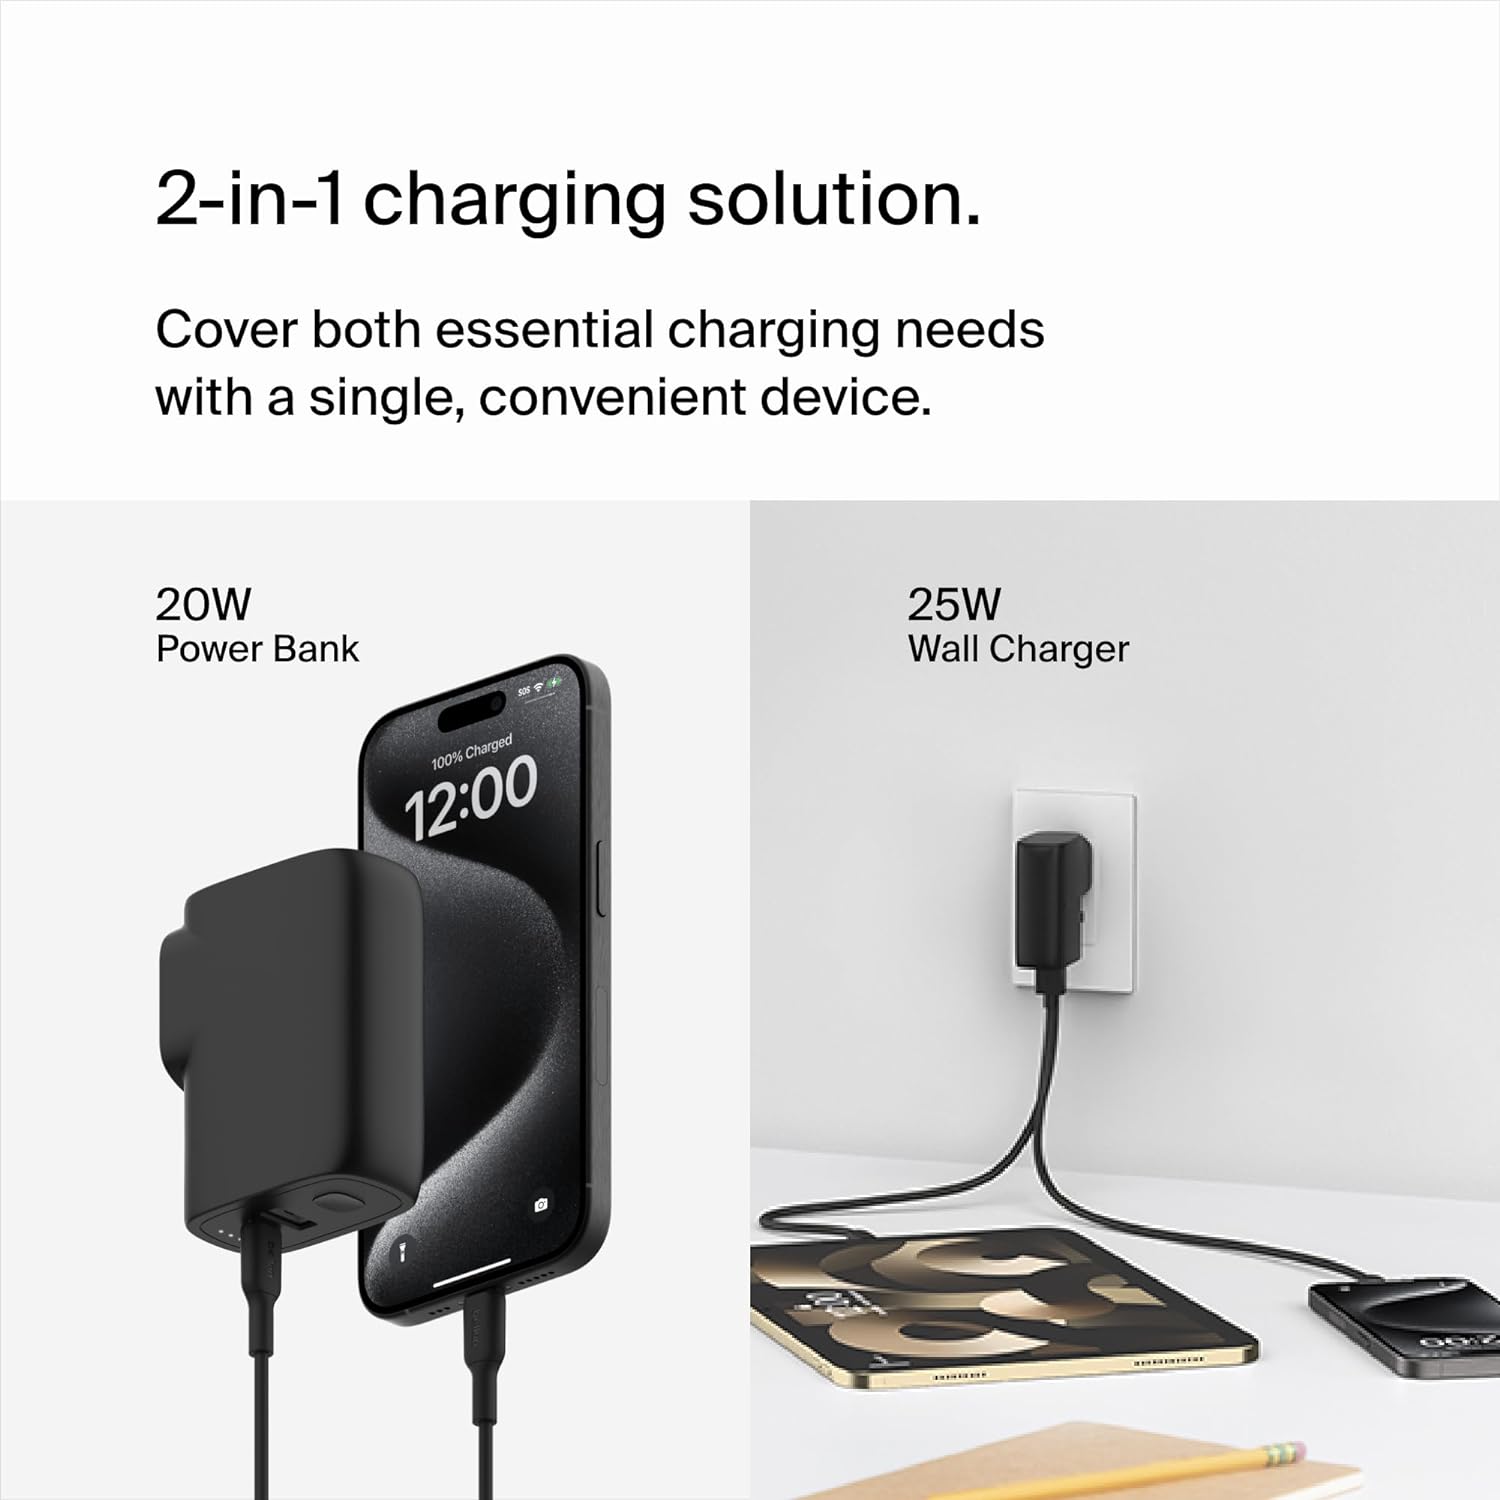 Belkin BoostCharge Hybrid Wall Charger 25W + Power Bank 5K, 2-in-1 Portable Charger, Portable Battery Charger w/USB-C Port & USB-A Port - Travel-Friendly, Dual-Port Charging Device - Black